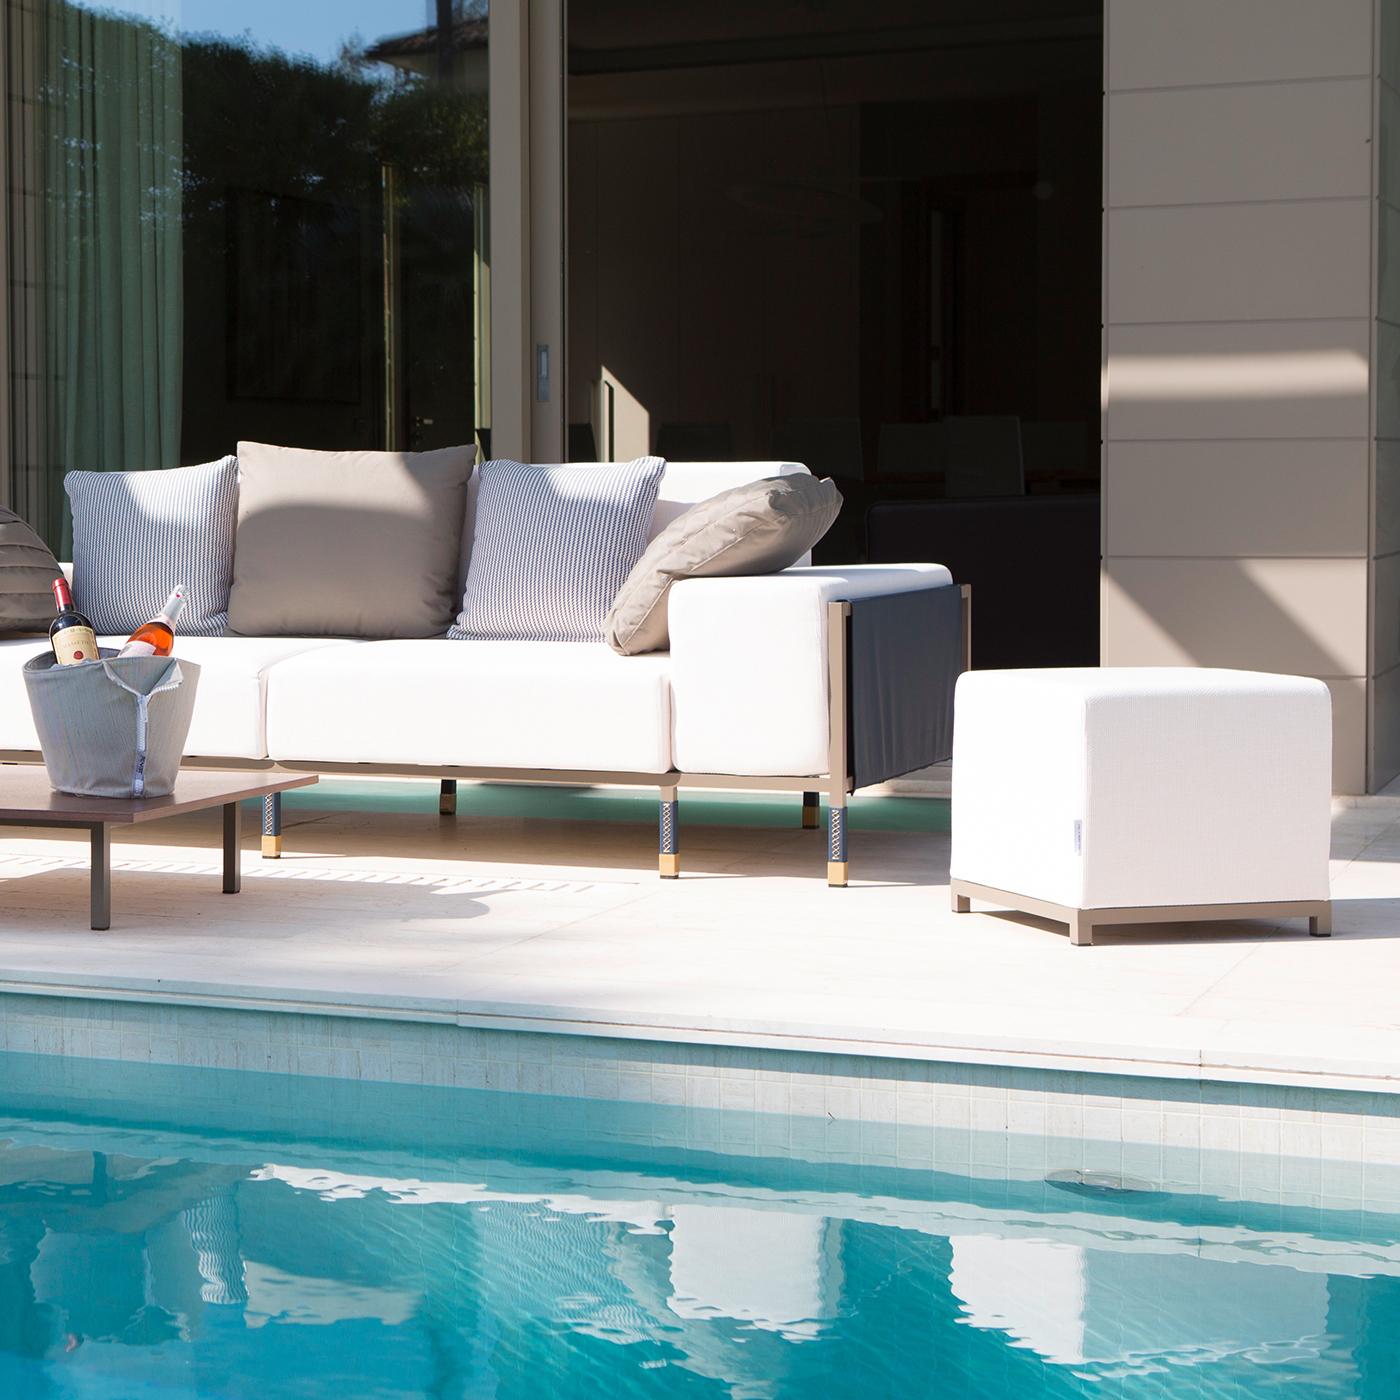 Boasting an elegant and modern allure, this sofa is a sophisticated piece of outdoor furniture. It comprises a lightweight varnished aluminum structure, with legs partly covered with hand-stitched leather and lacquered satin gold feet. The two seats